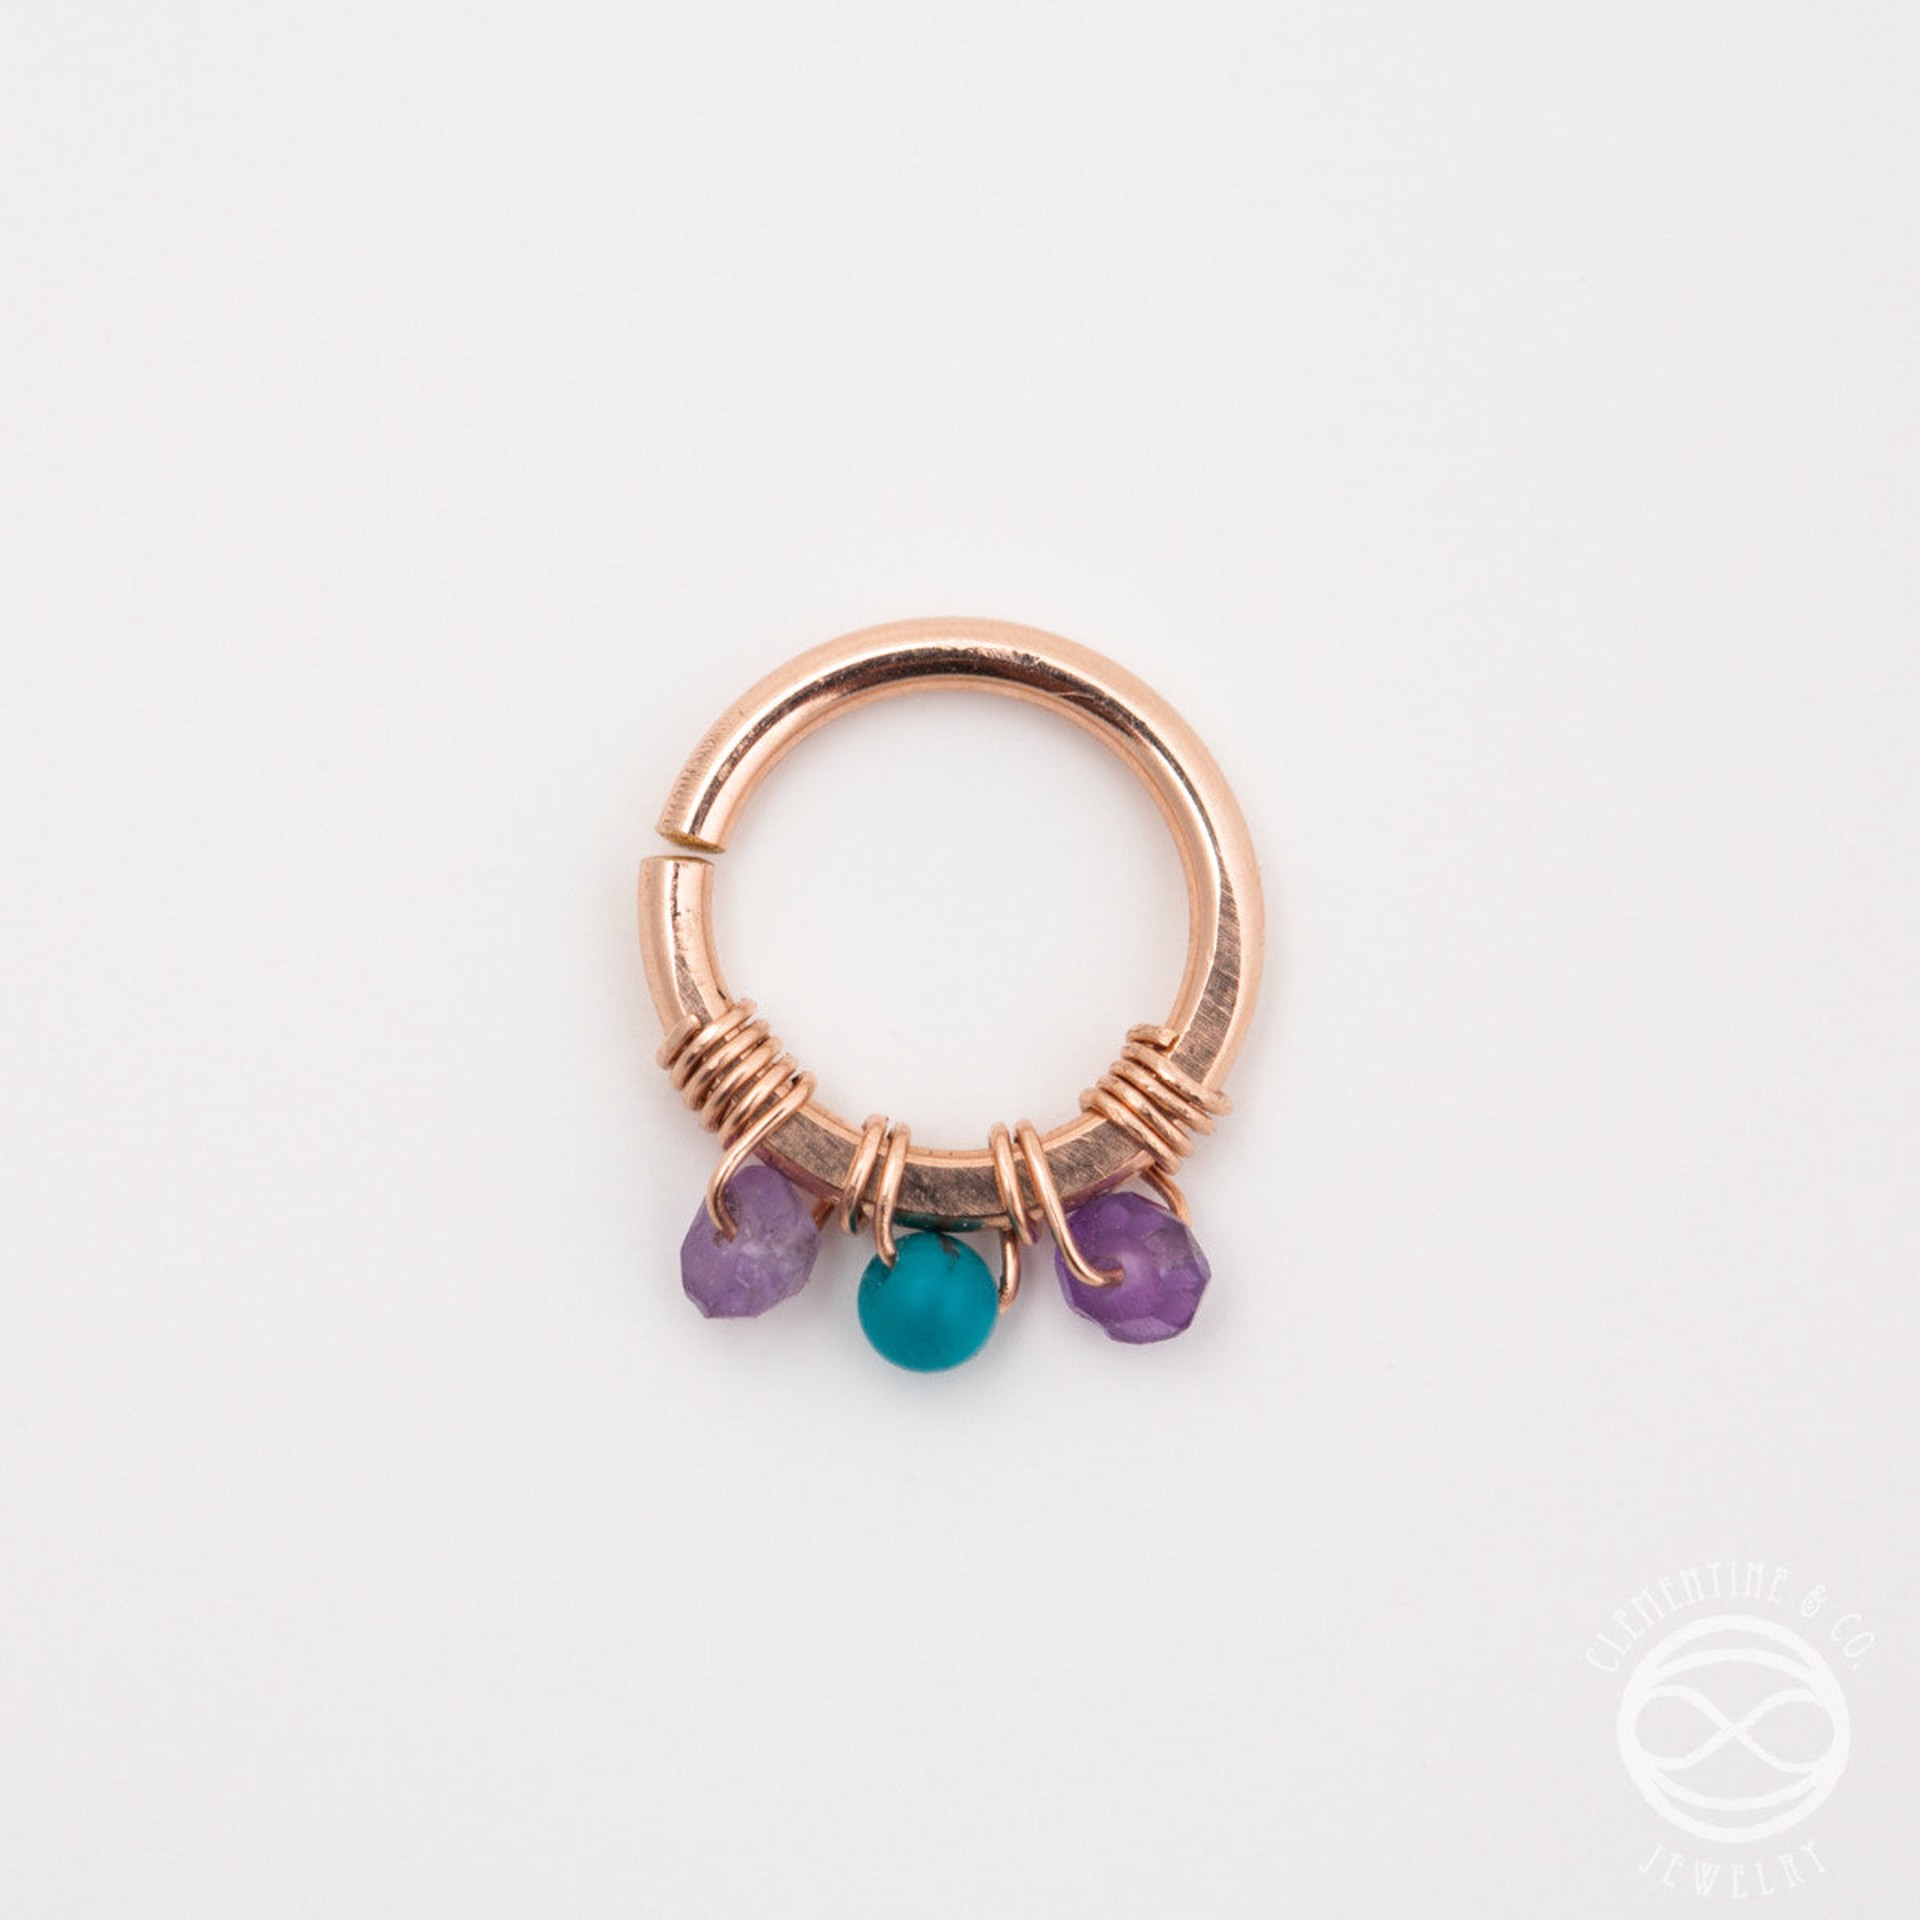 Jeweled Septum Ring in Rose Gold - 8mm by Clementine & Co. Jewelry